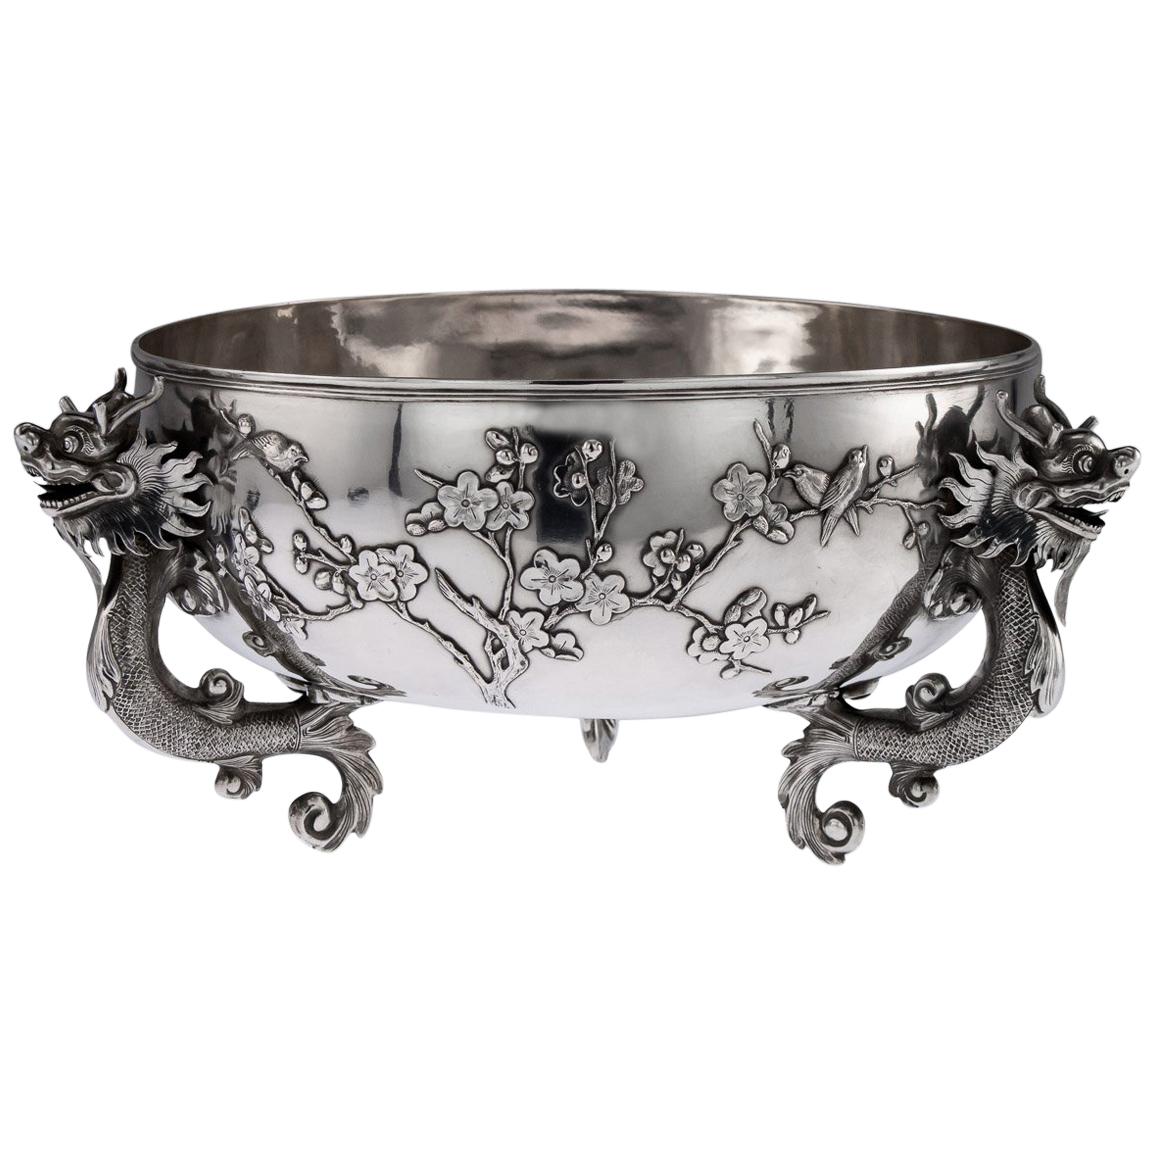 Antique Chinese Export Solid Silver Dragon Bowl, Luen Wo, circa 1890